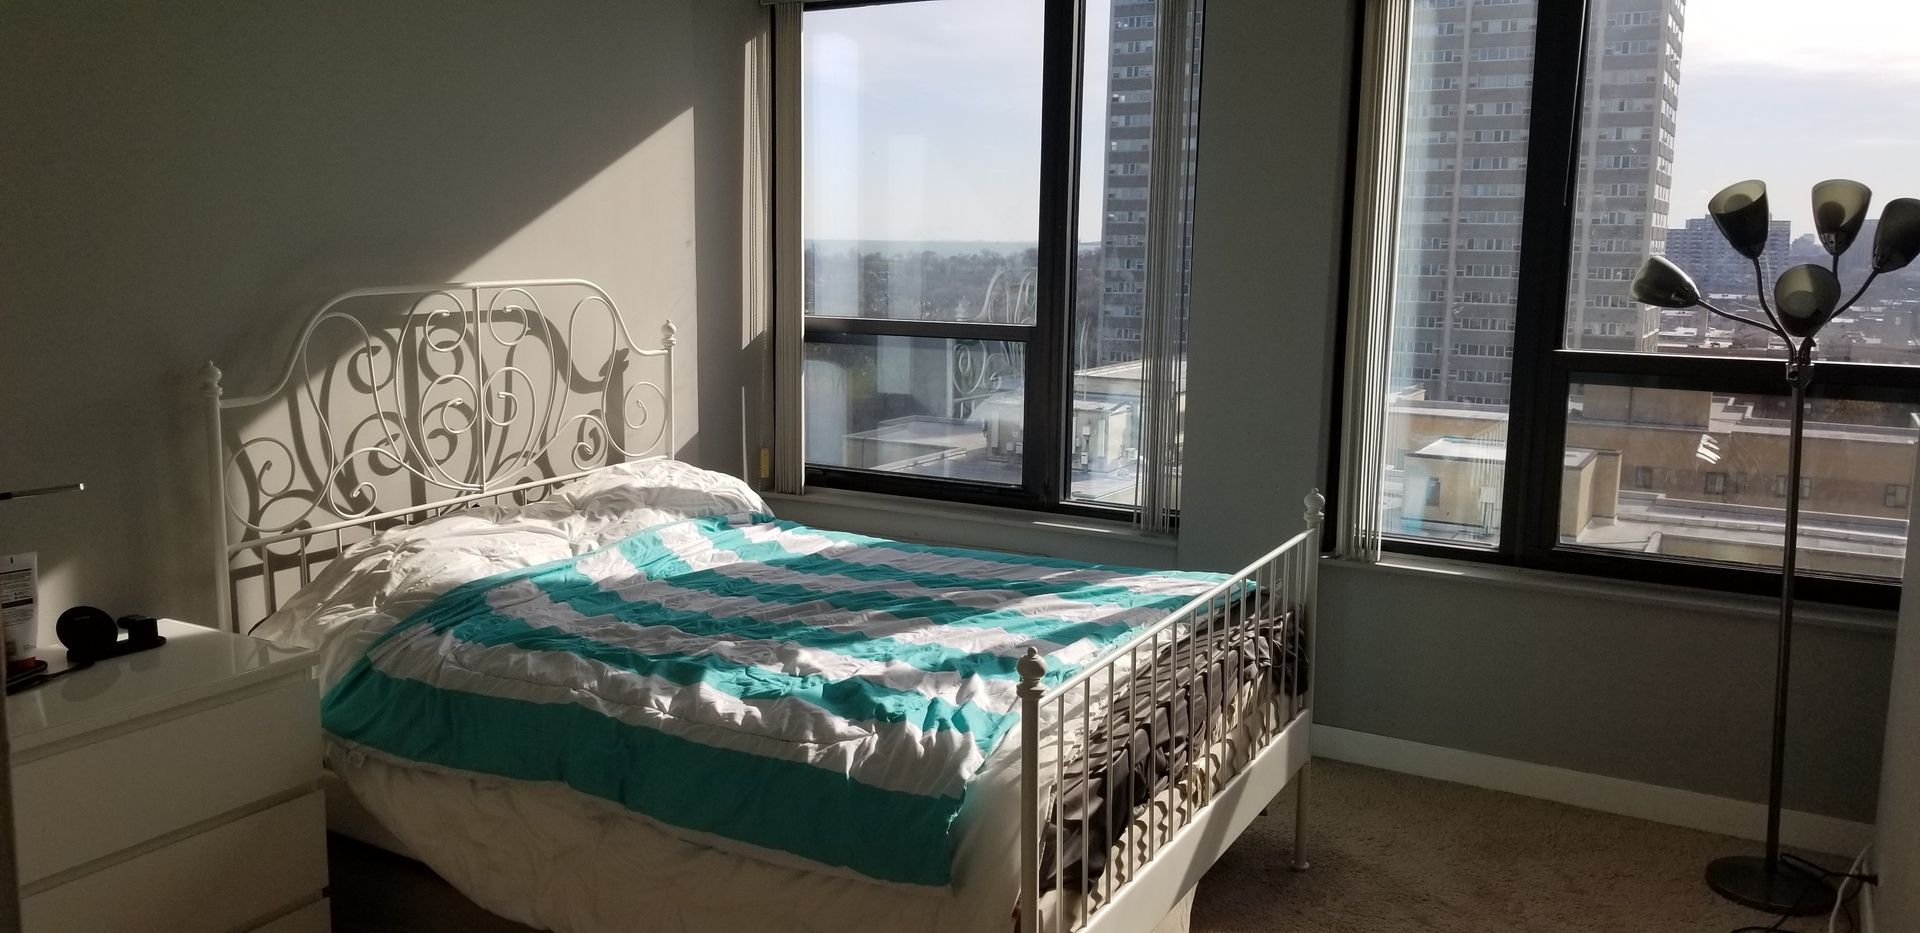 Photo 21: Photos: 5100 N Marine Drive Unit 13G in Chicago: CHI - Uptown Residential for sale ()  : MLS®# 10934137